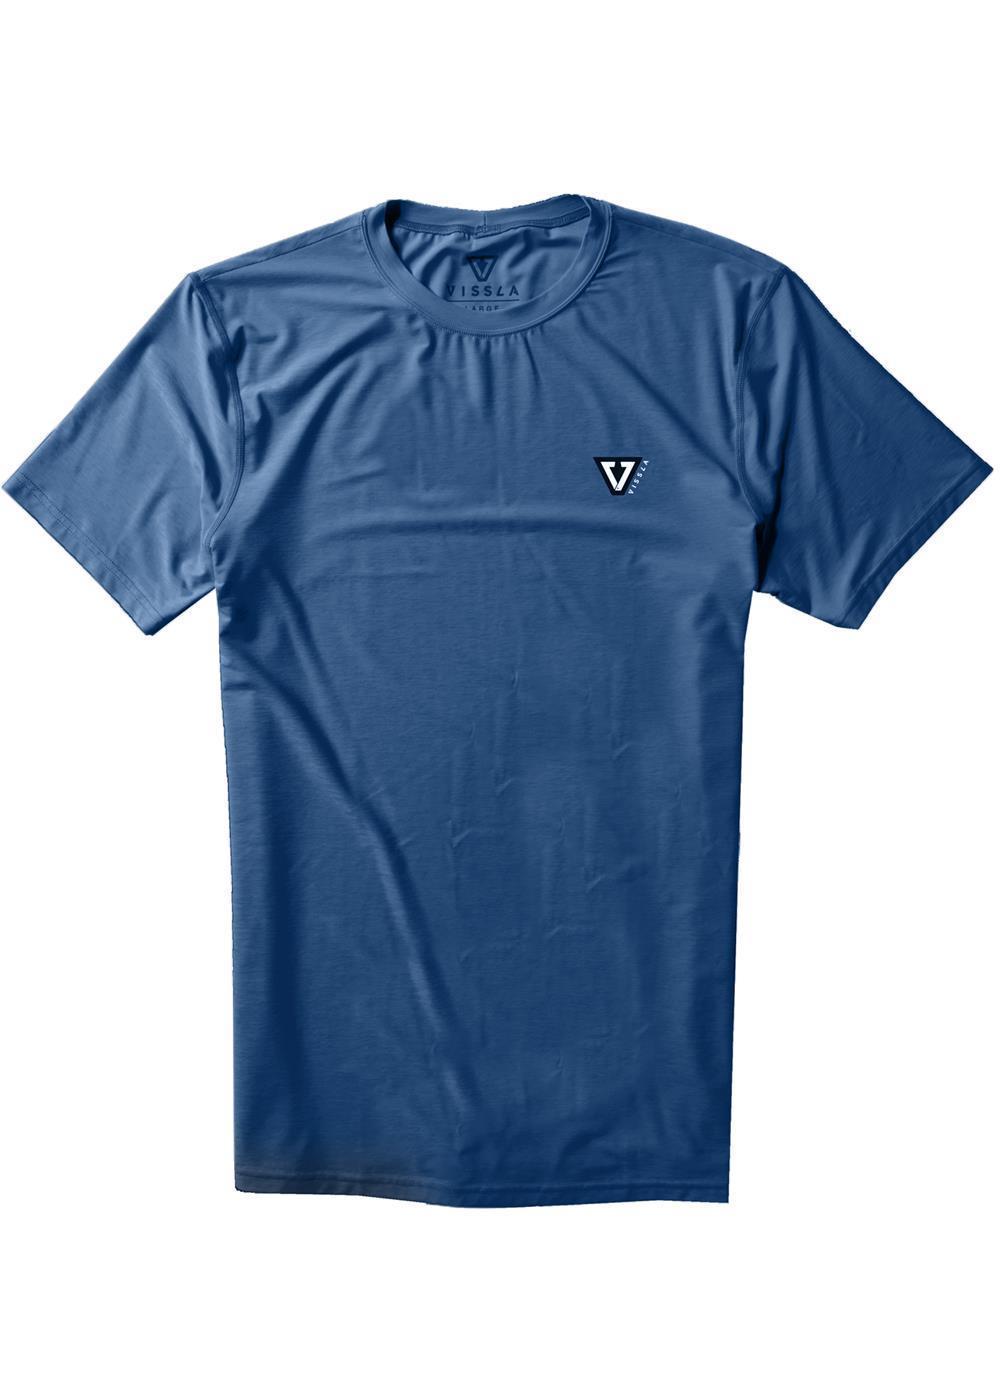 Vissla Men's naval blue heather twisted eco short sleeve with a black and white Vissla logo on the wearer's upper left chest